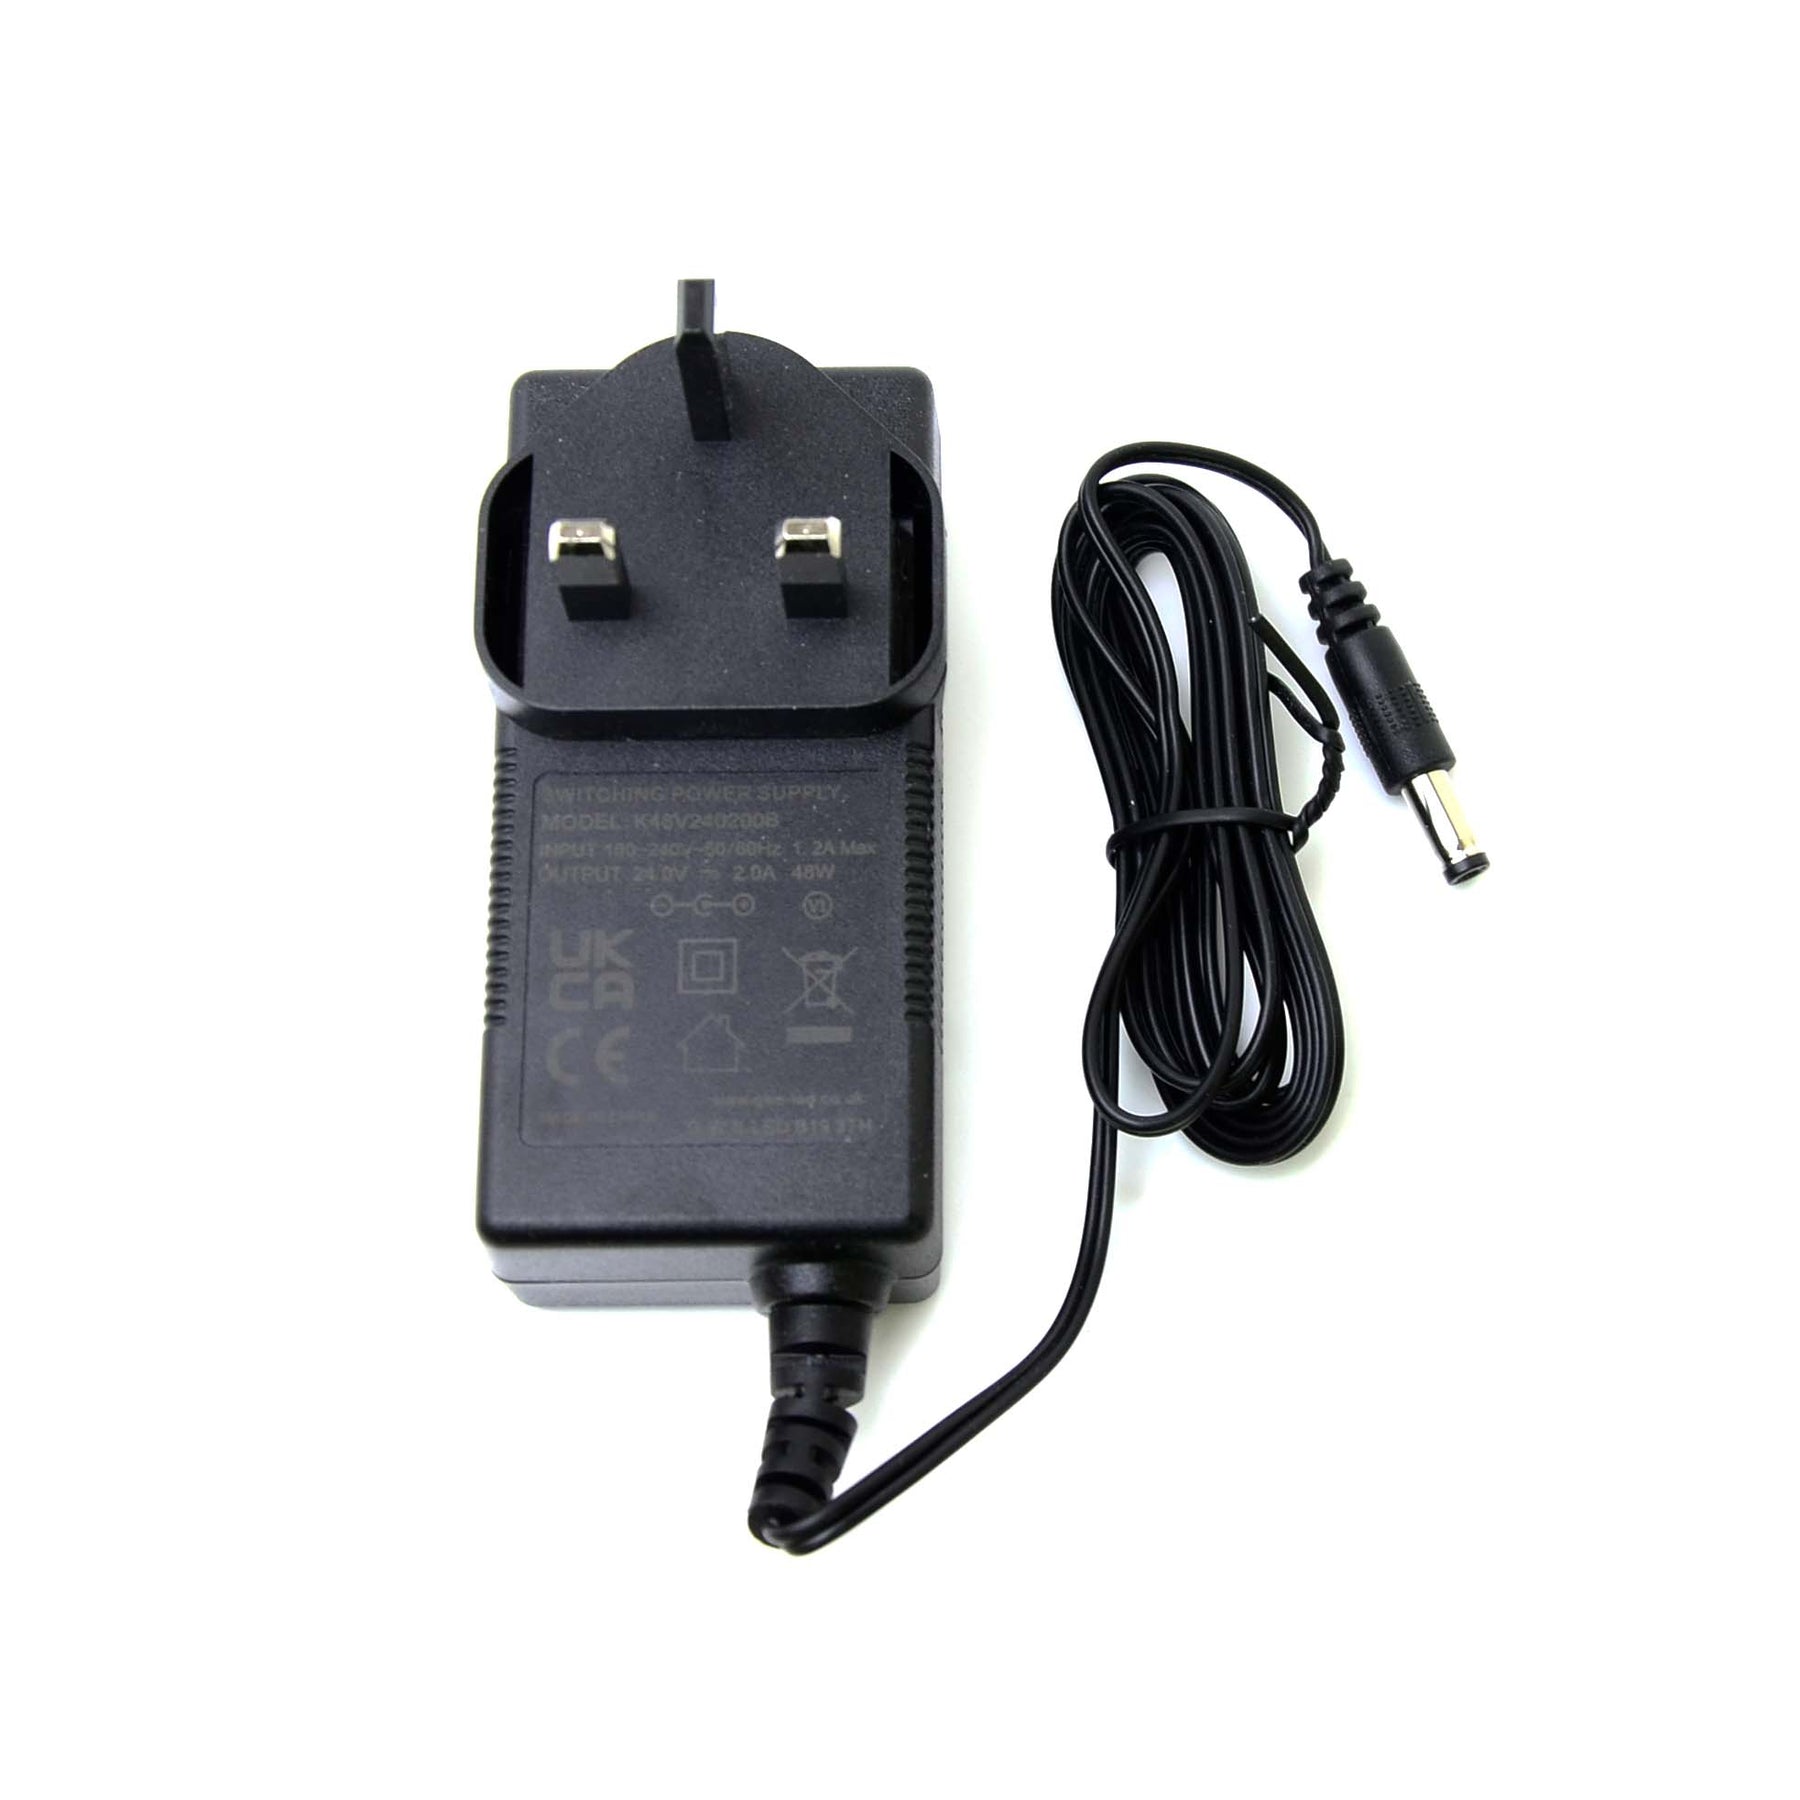 G.W.S LED Wholesale LED Drivers/LED Power Supplies IP20 (Non-Waterproof) / 24V / 48W 24V 2A 48W LED Power Adapter